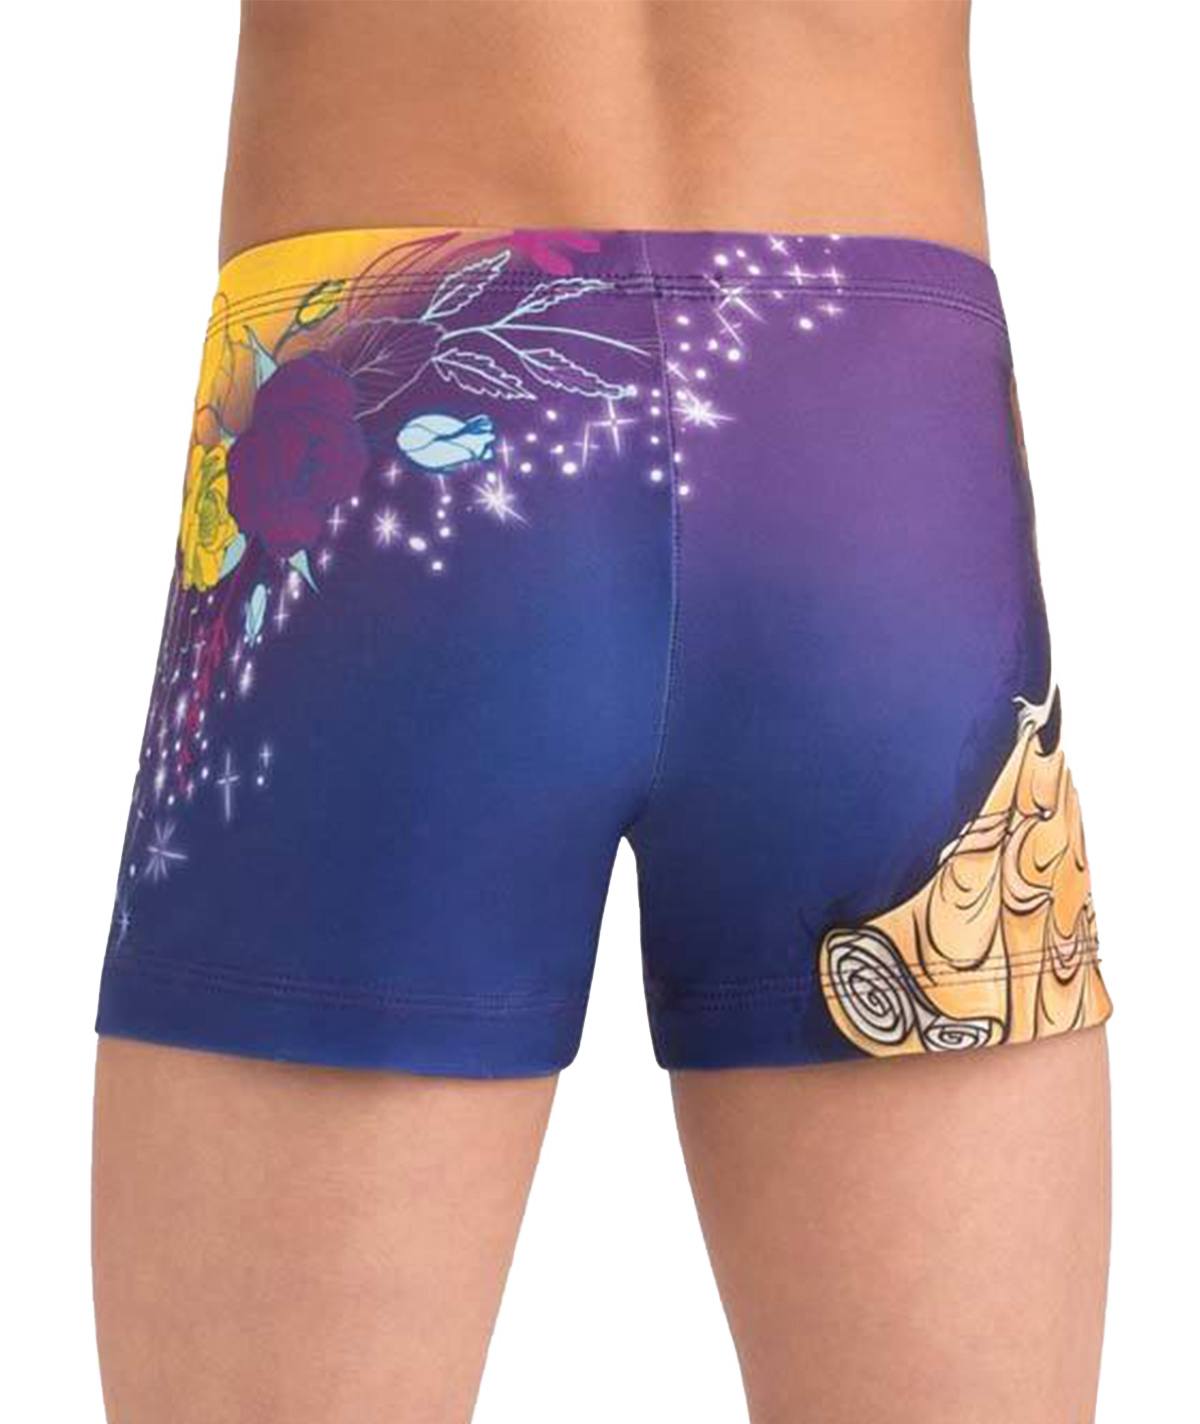 Beauty and the Beast Workout Shorts